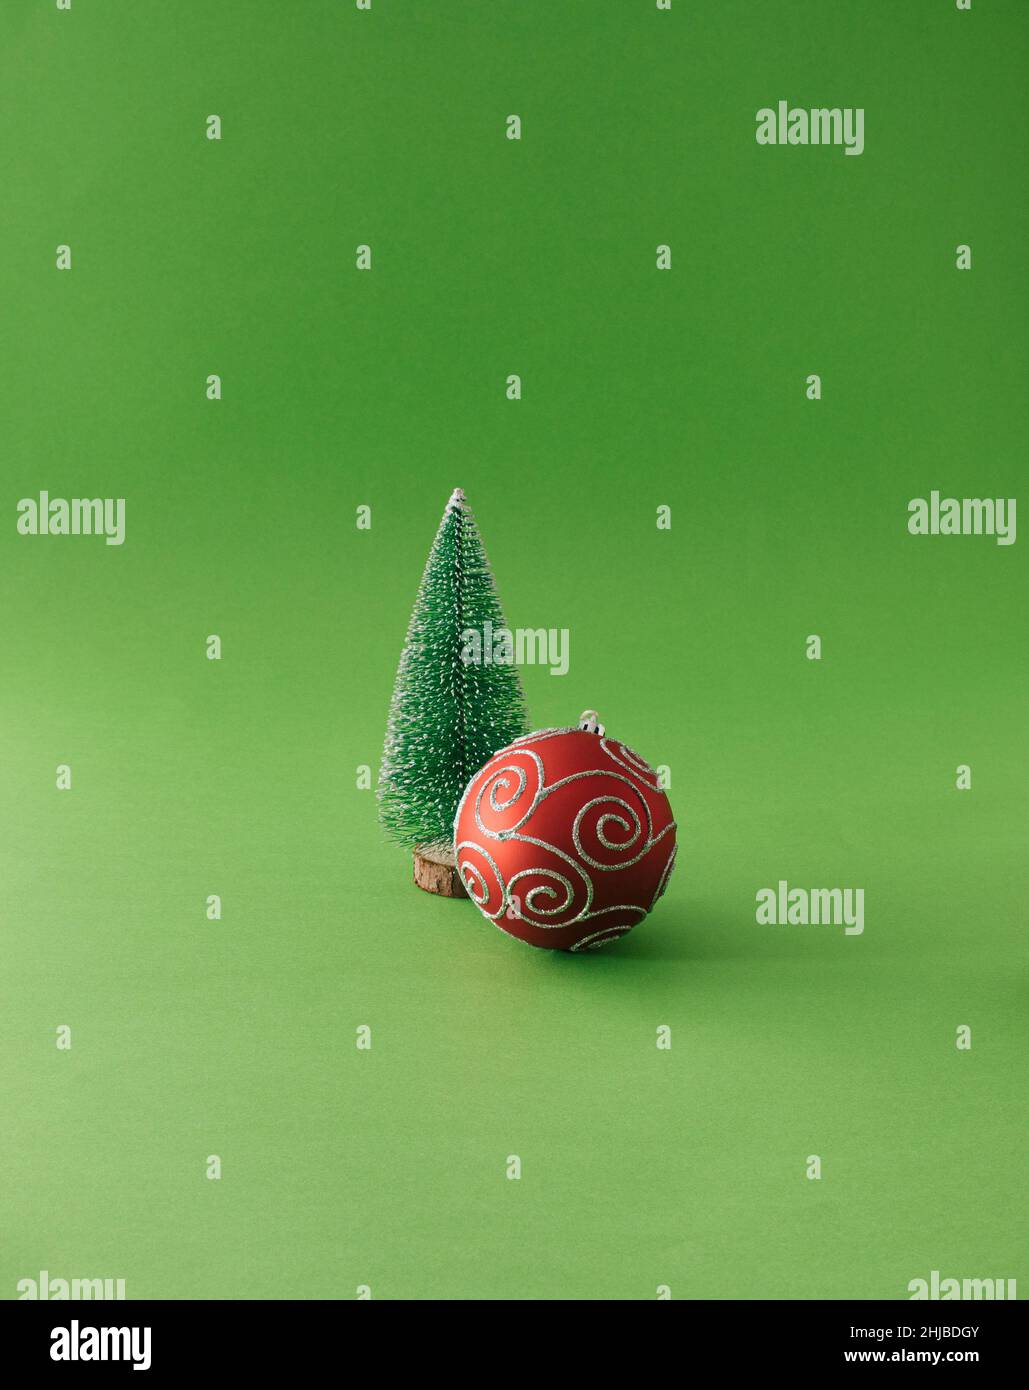 Christmas tree with red bobbles on a green background. Minimal New Year's concept. Stock Photo